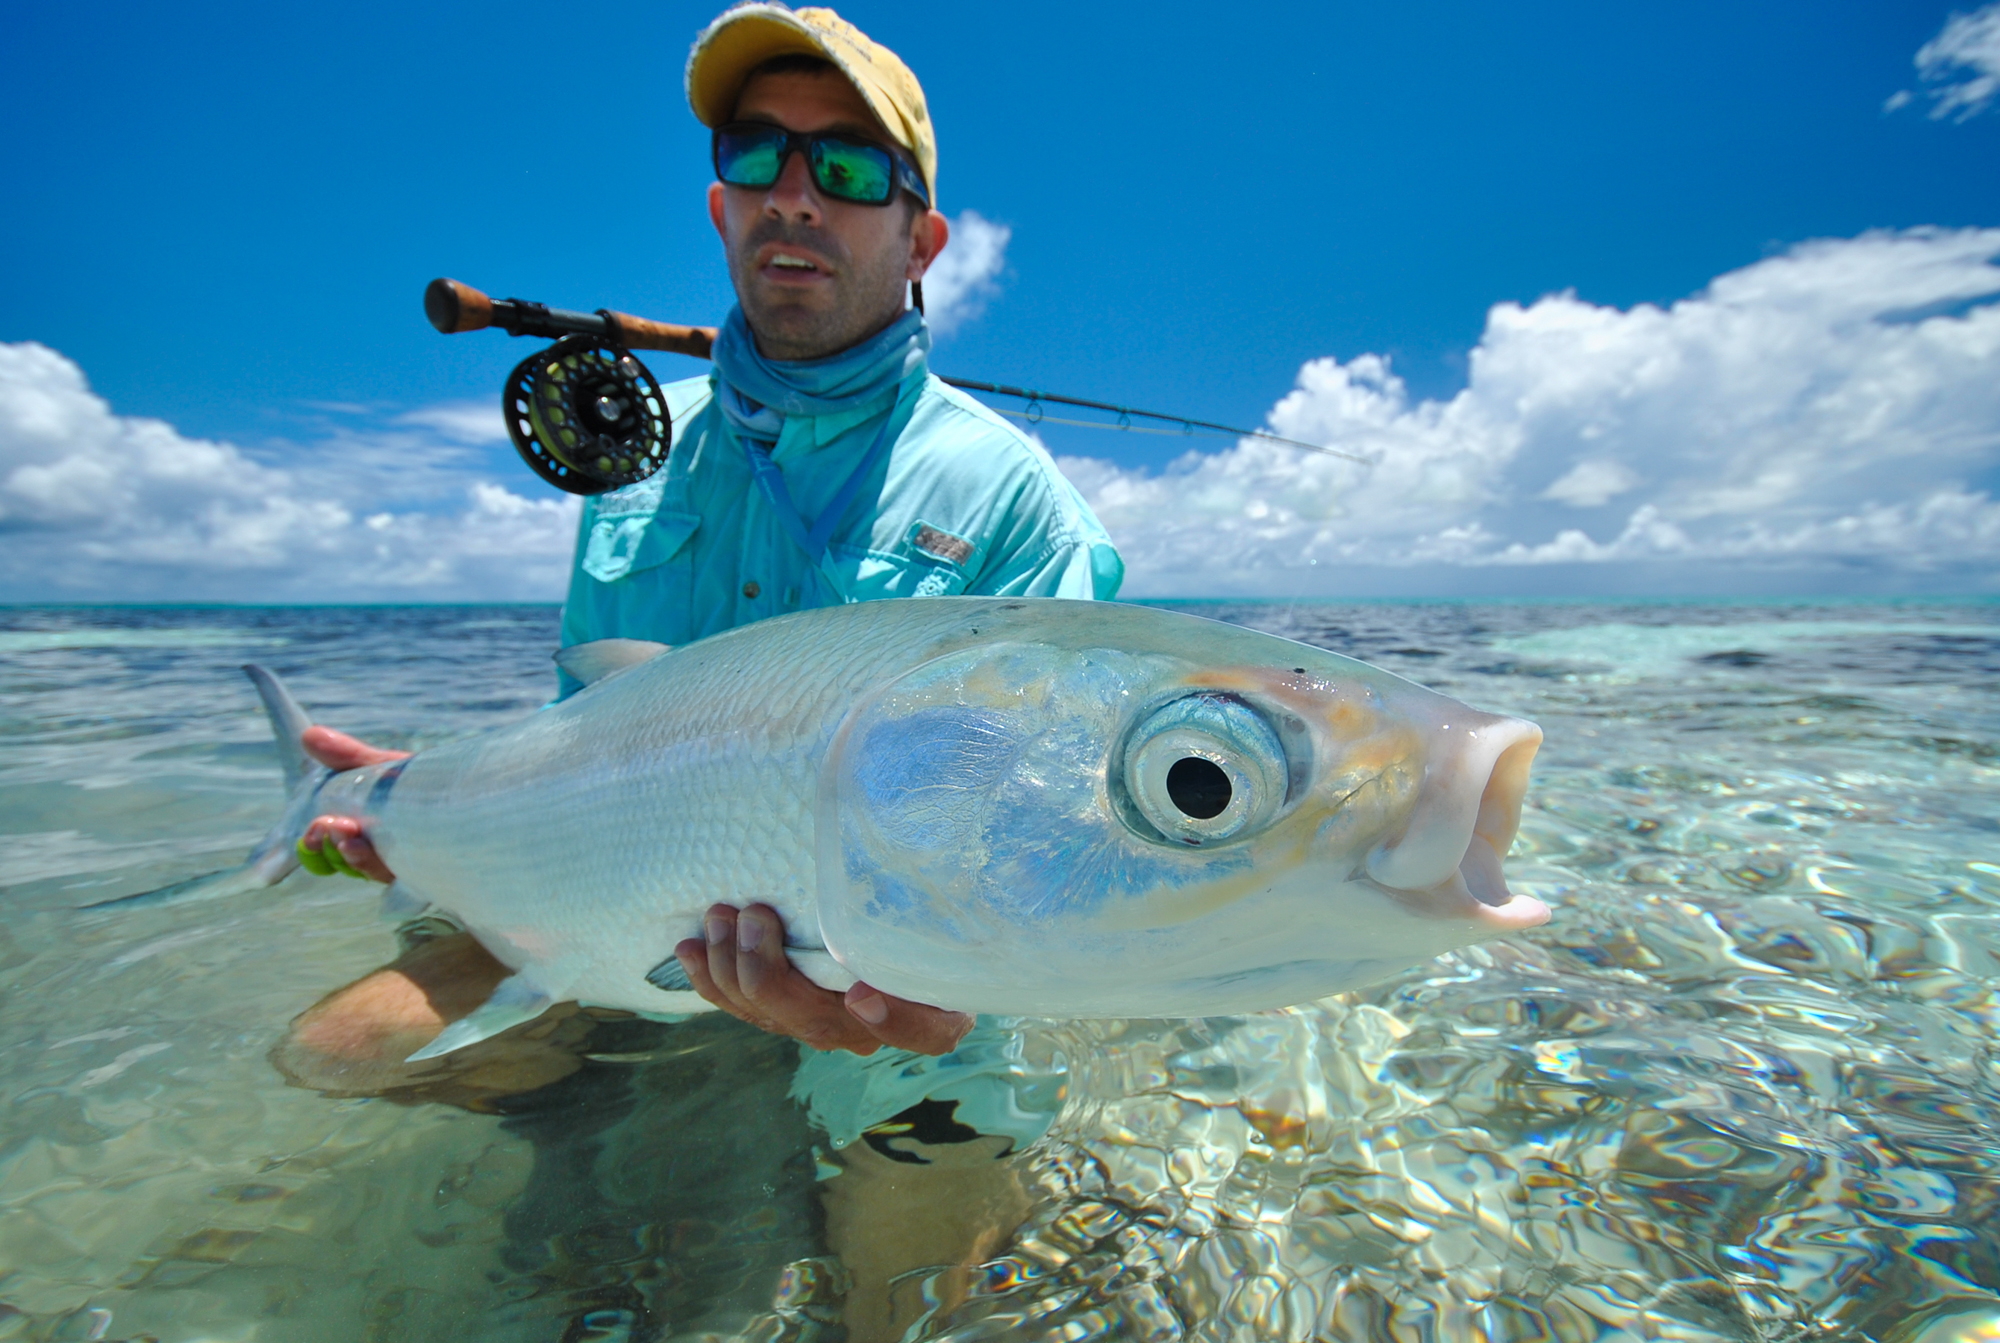 Happy fly fisherman holding the milkfish caught on a fly during his fly fishing trip to Cosmoledo Island.